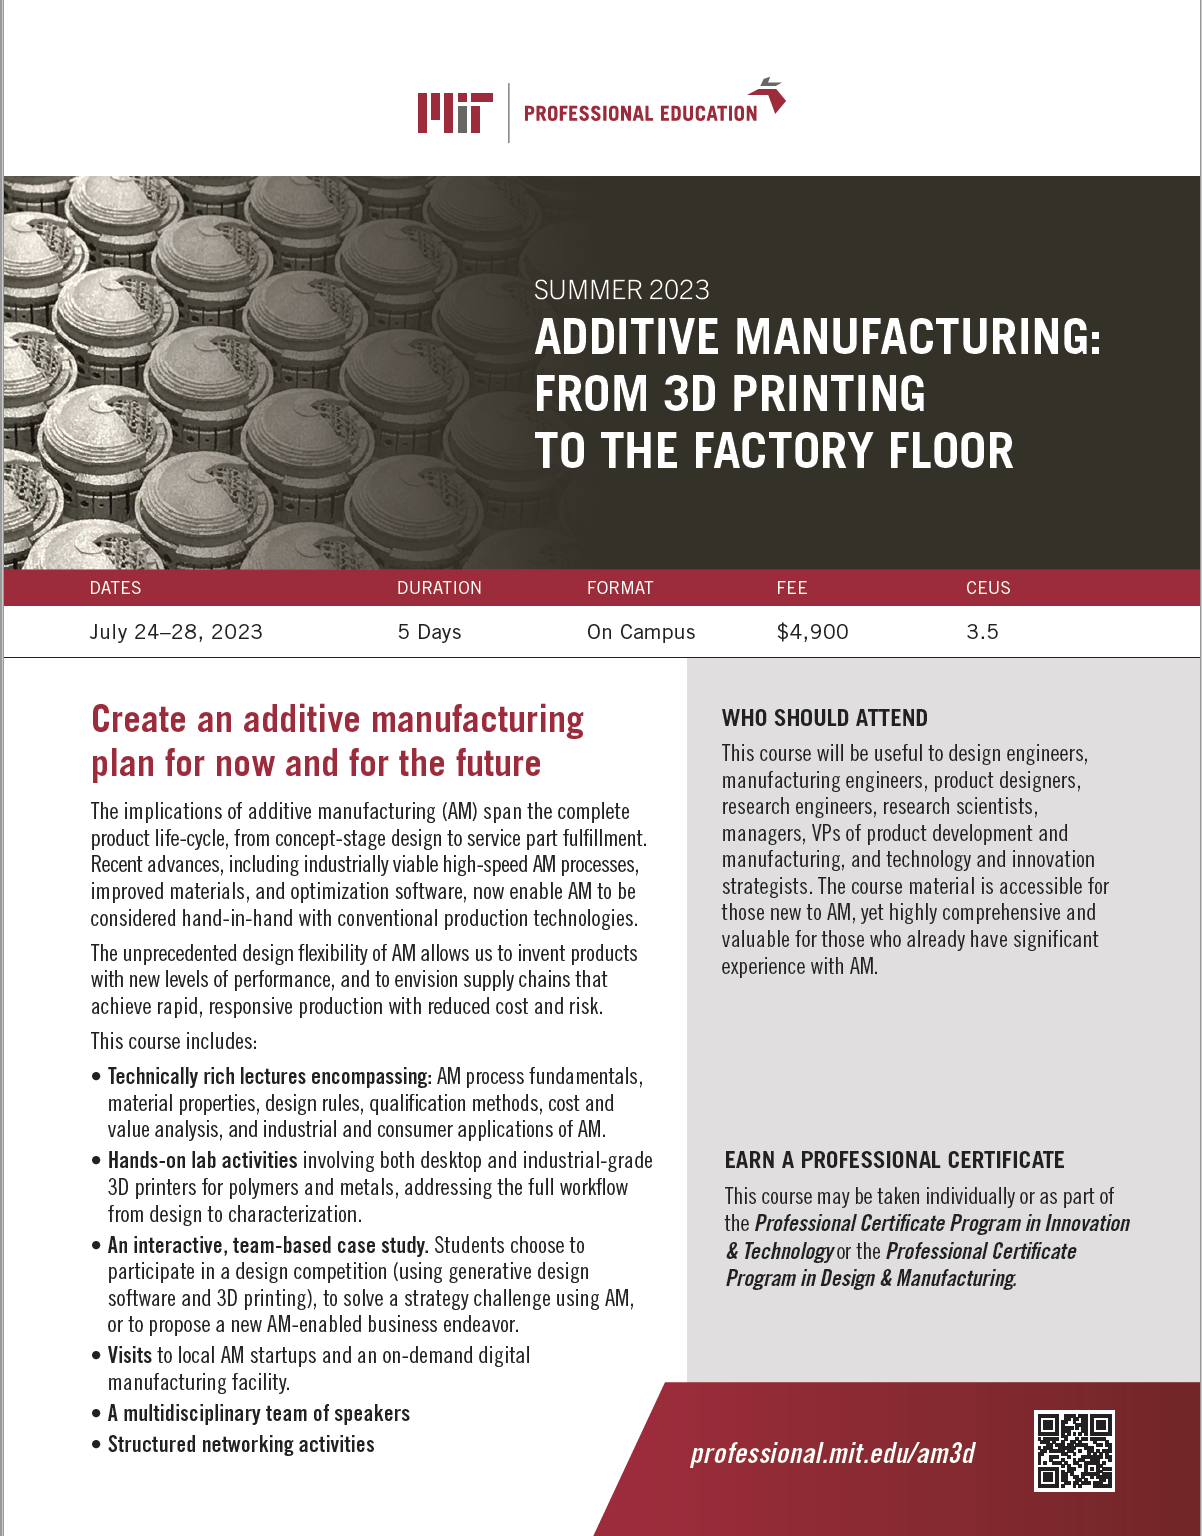 Additive Manufacturing: From 3D Printing to the Factory Floor - Brochure Image